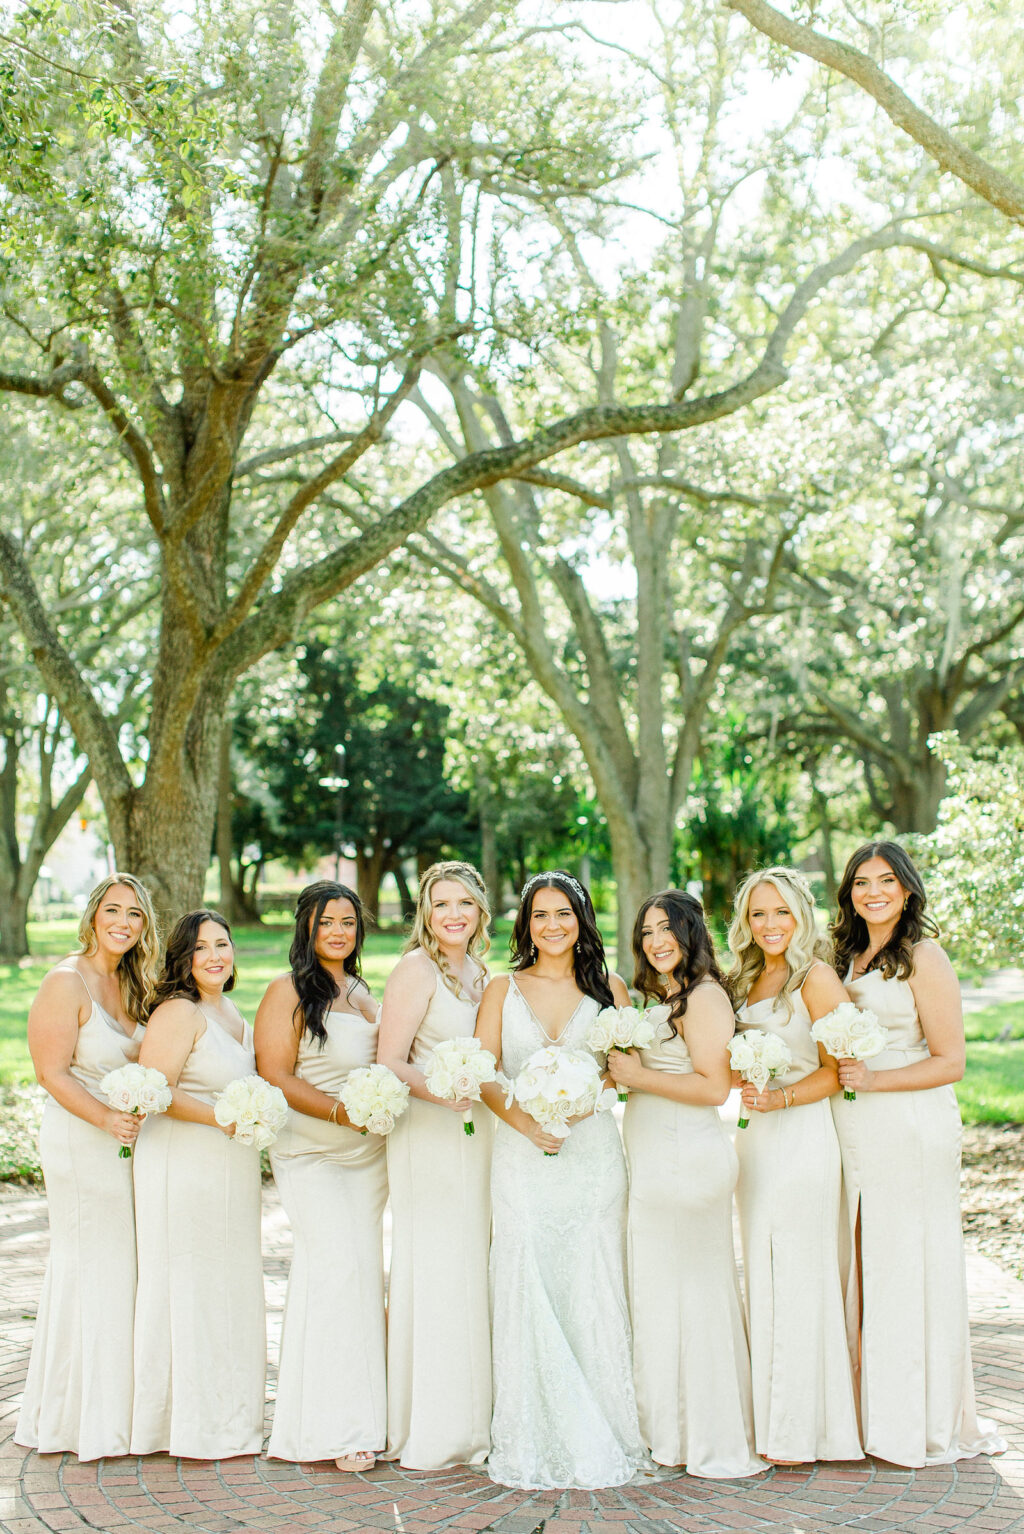 Bride Wearing Lace Fit and Flare Wedding Dress with Bridesmaids Wearing Matching Gold Dresses Holding White Floral Bouquets | Tampa Bay Wedding Hair and Makeup Femme Akoi Beauty Studio | Bridesmaids Attire Bella Bridesmaids